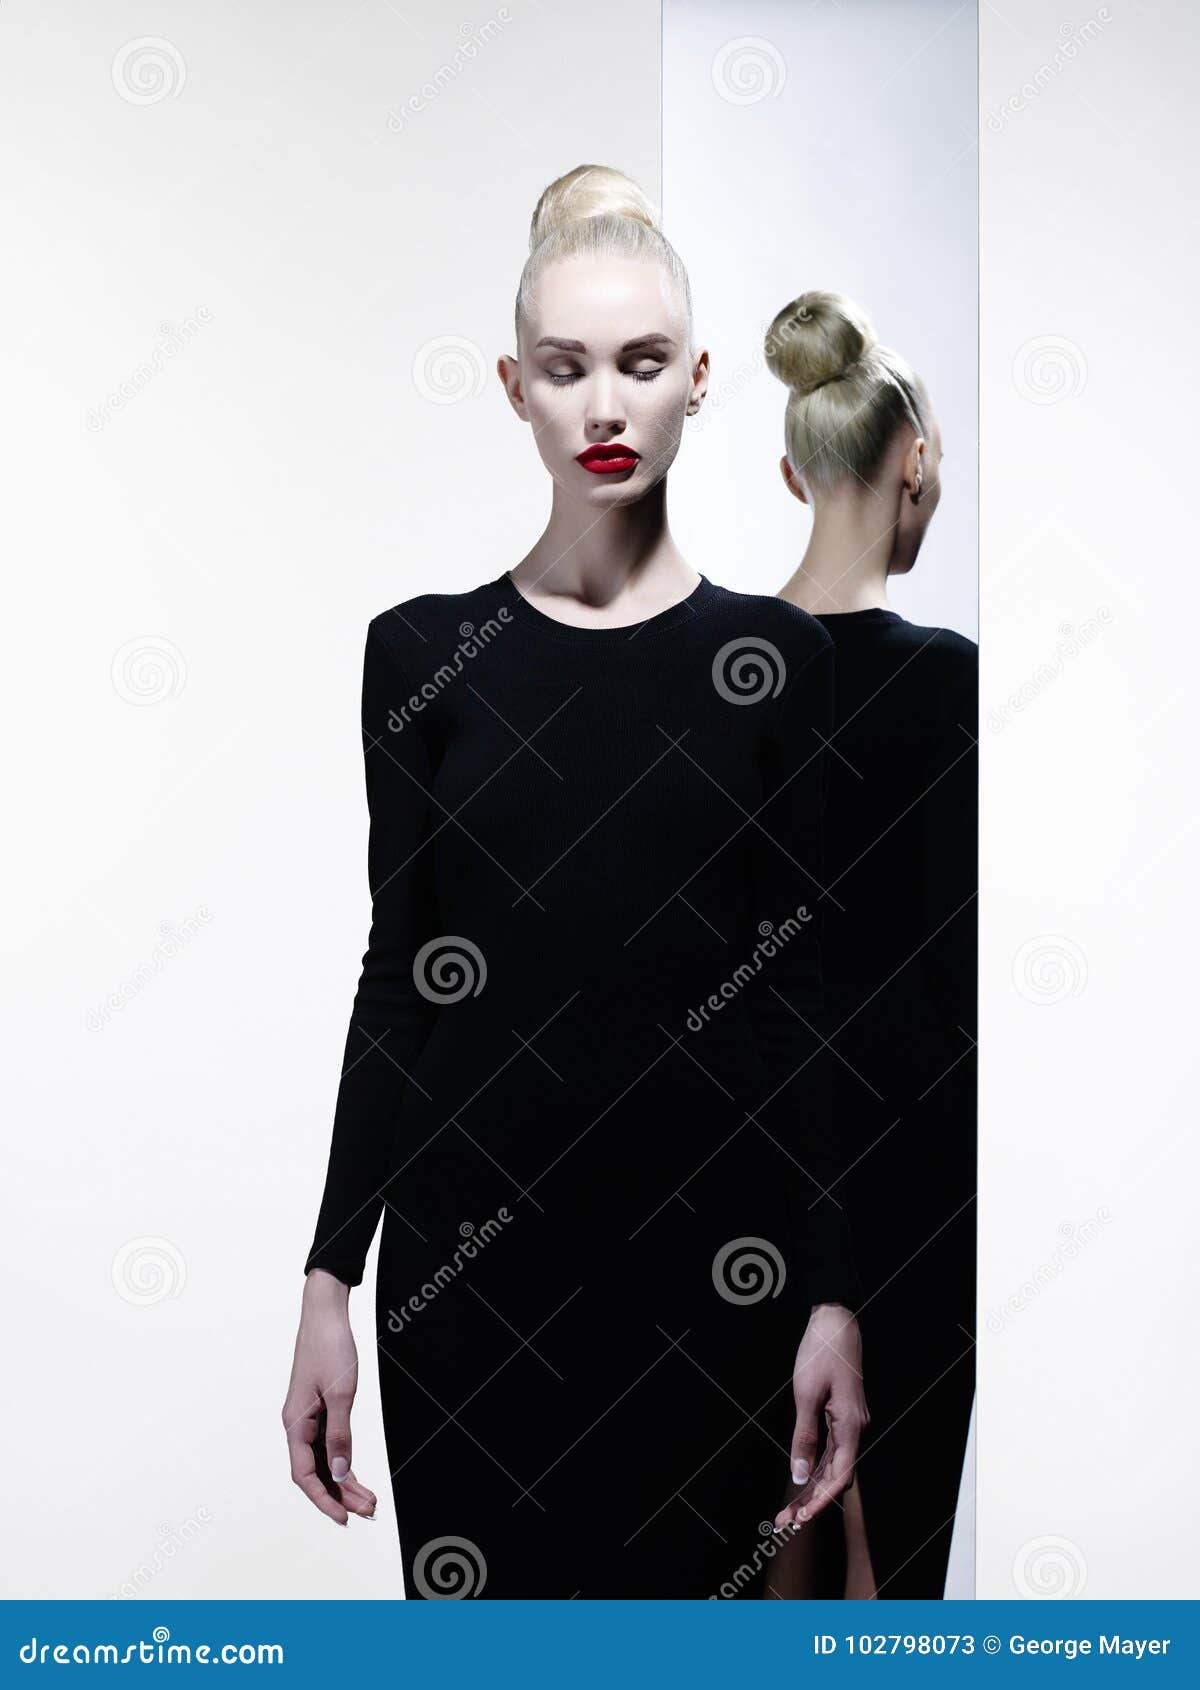 Elegant Blonde and Her Reflection in the Mirror Stock Image - Image of ...